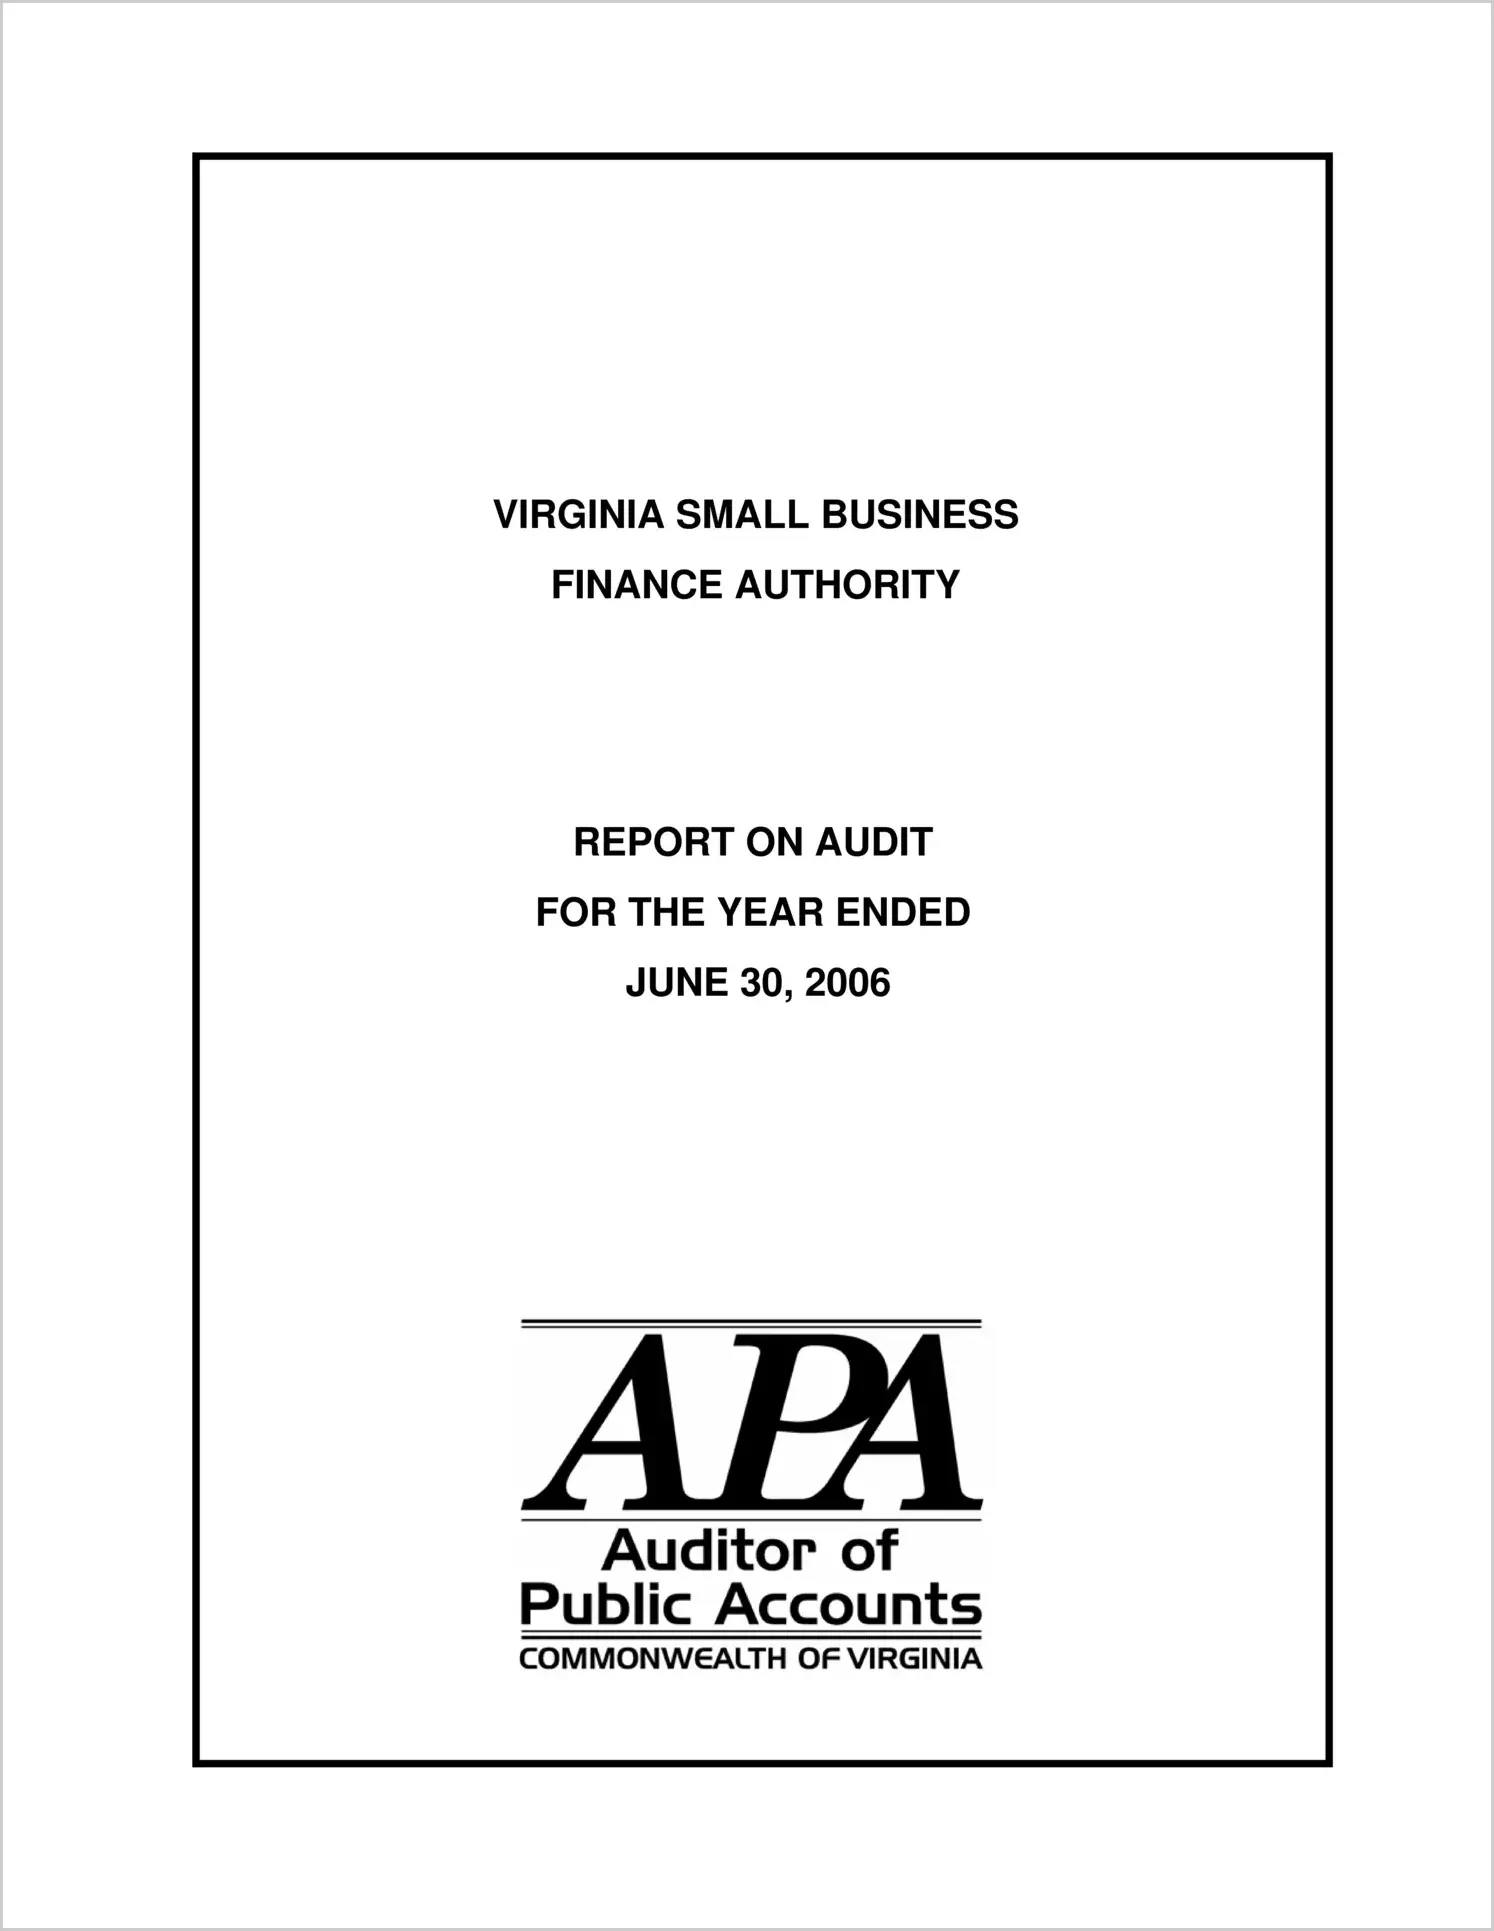 Virginia Small Business Financing Authority for the year ended June 30, 2006